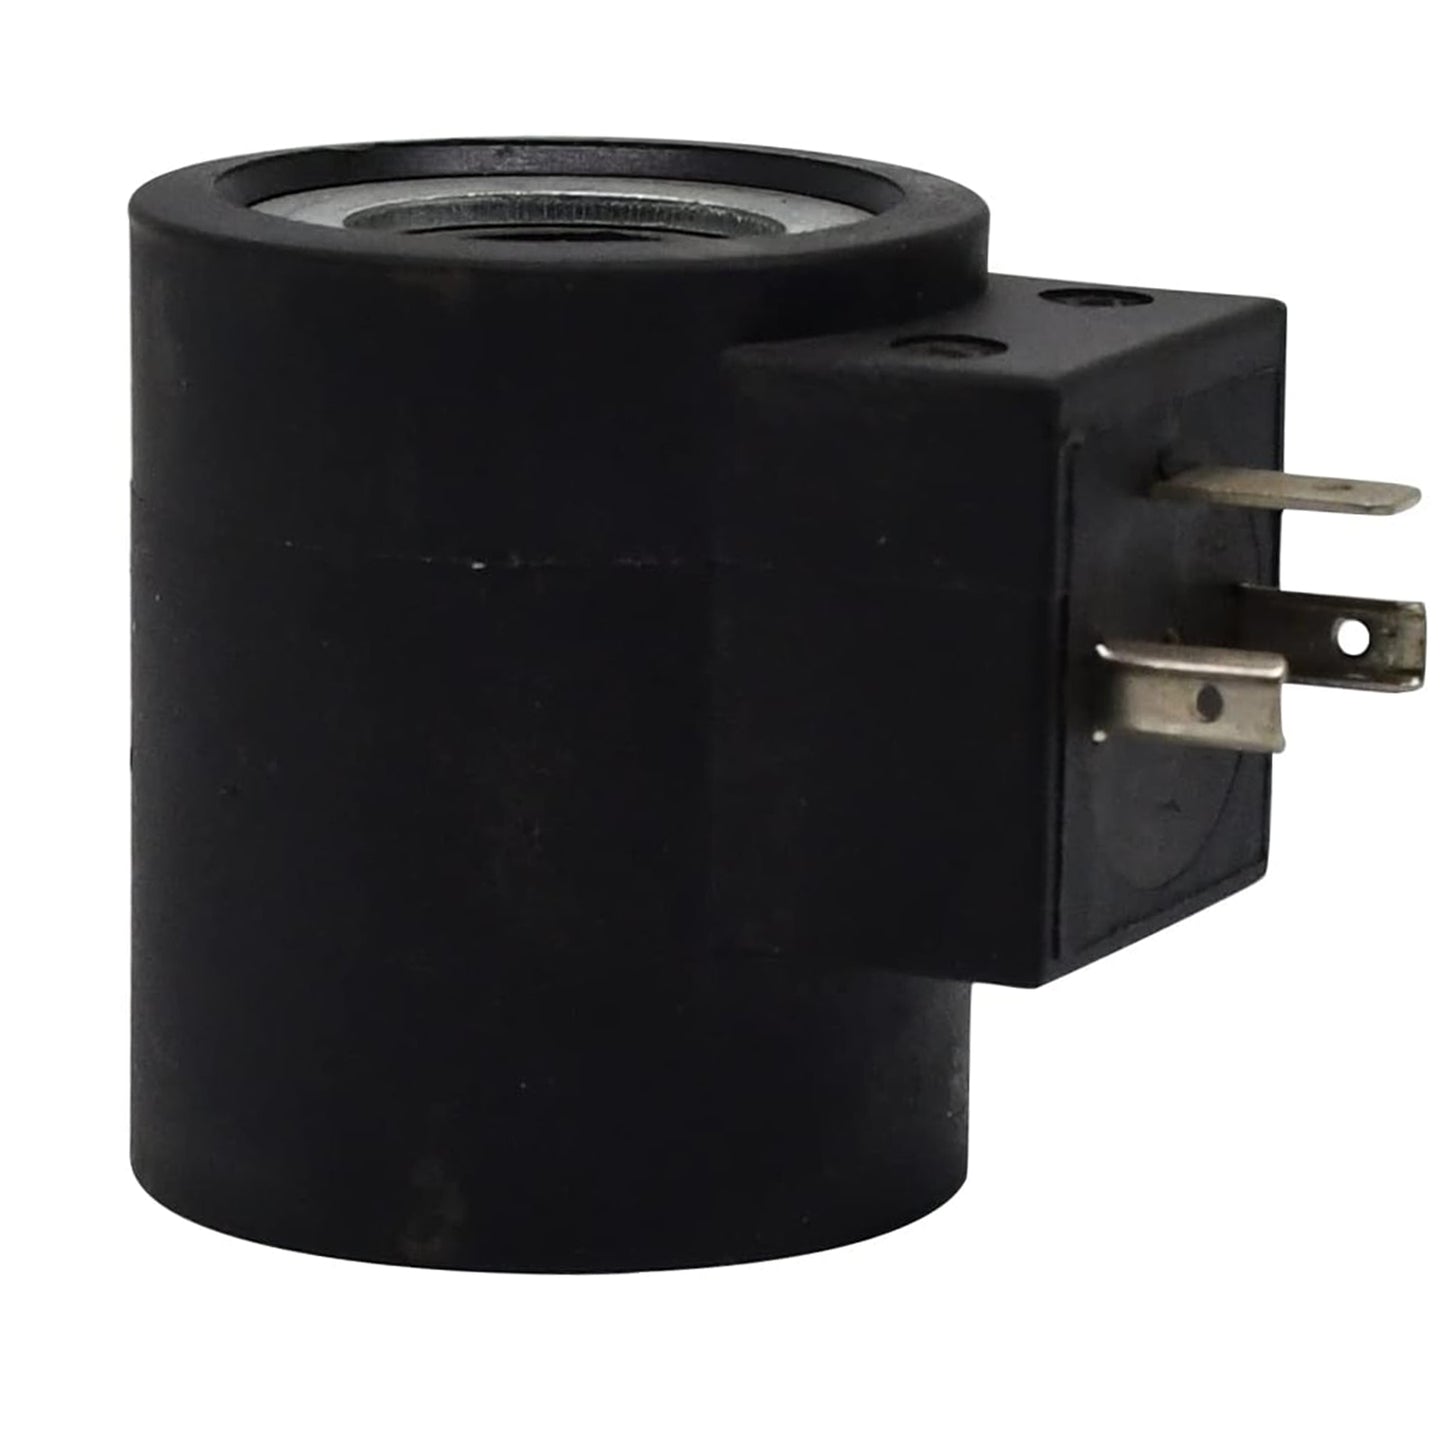 6356024 Solenoid Valve Coil Compatible With HydraForce Valve Stem Series 10 12 16 38 58